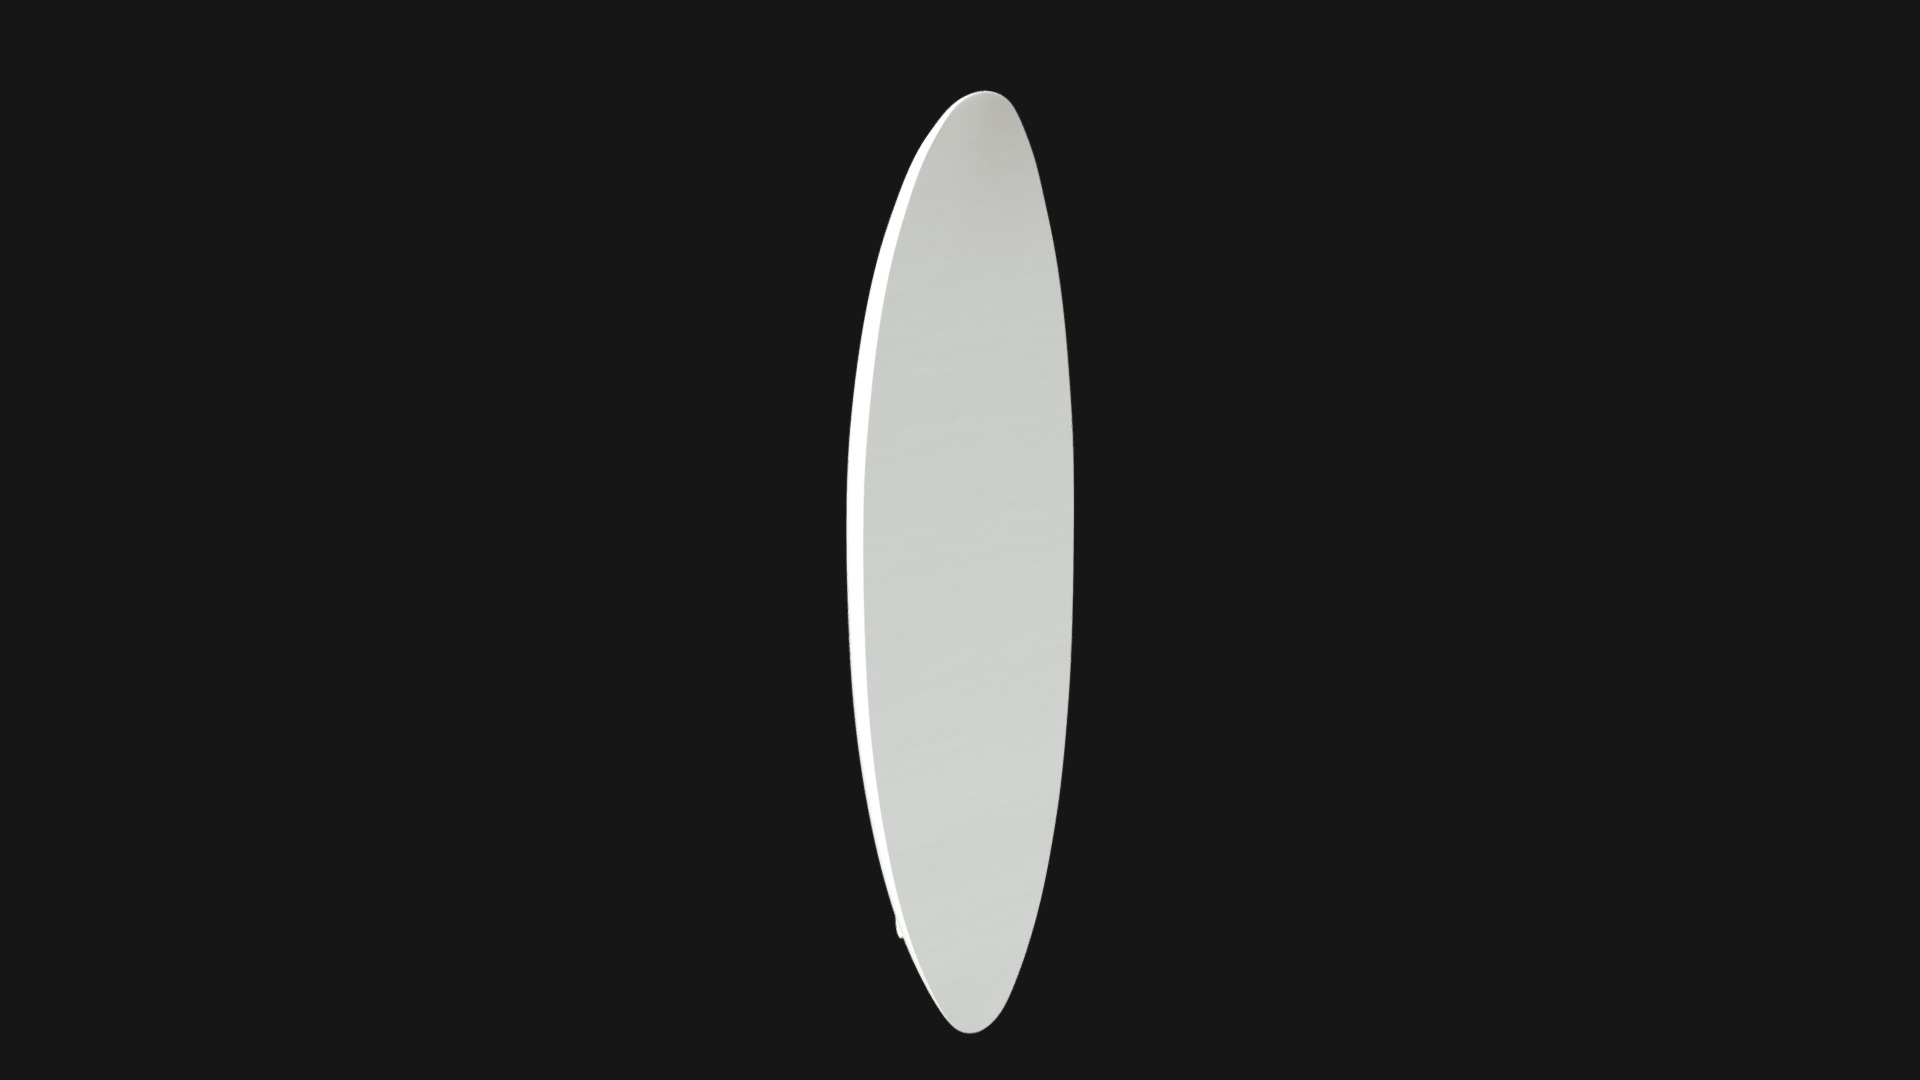 3D model Surfboard - This is a 3D model of the Surfboard. The 3D model is about a white crescent moon.